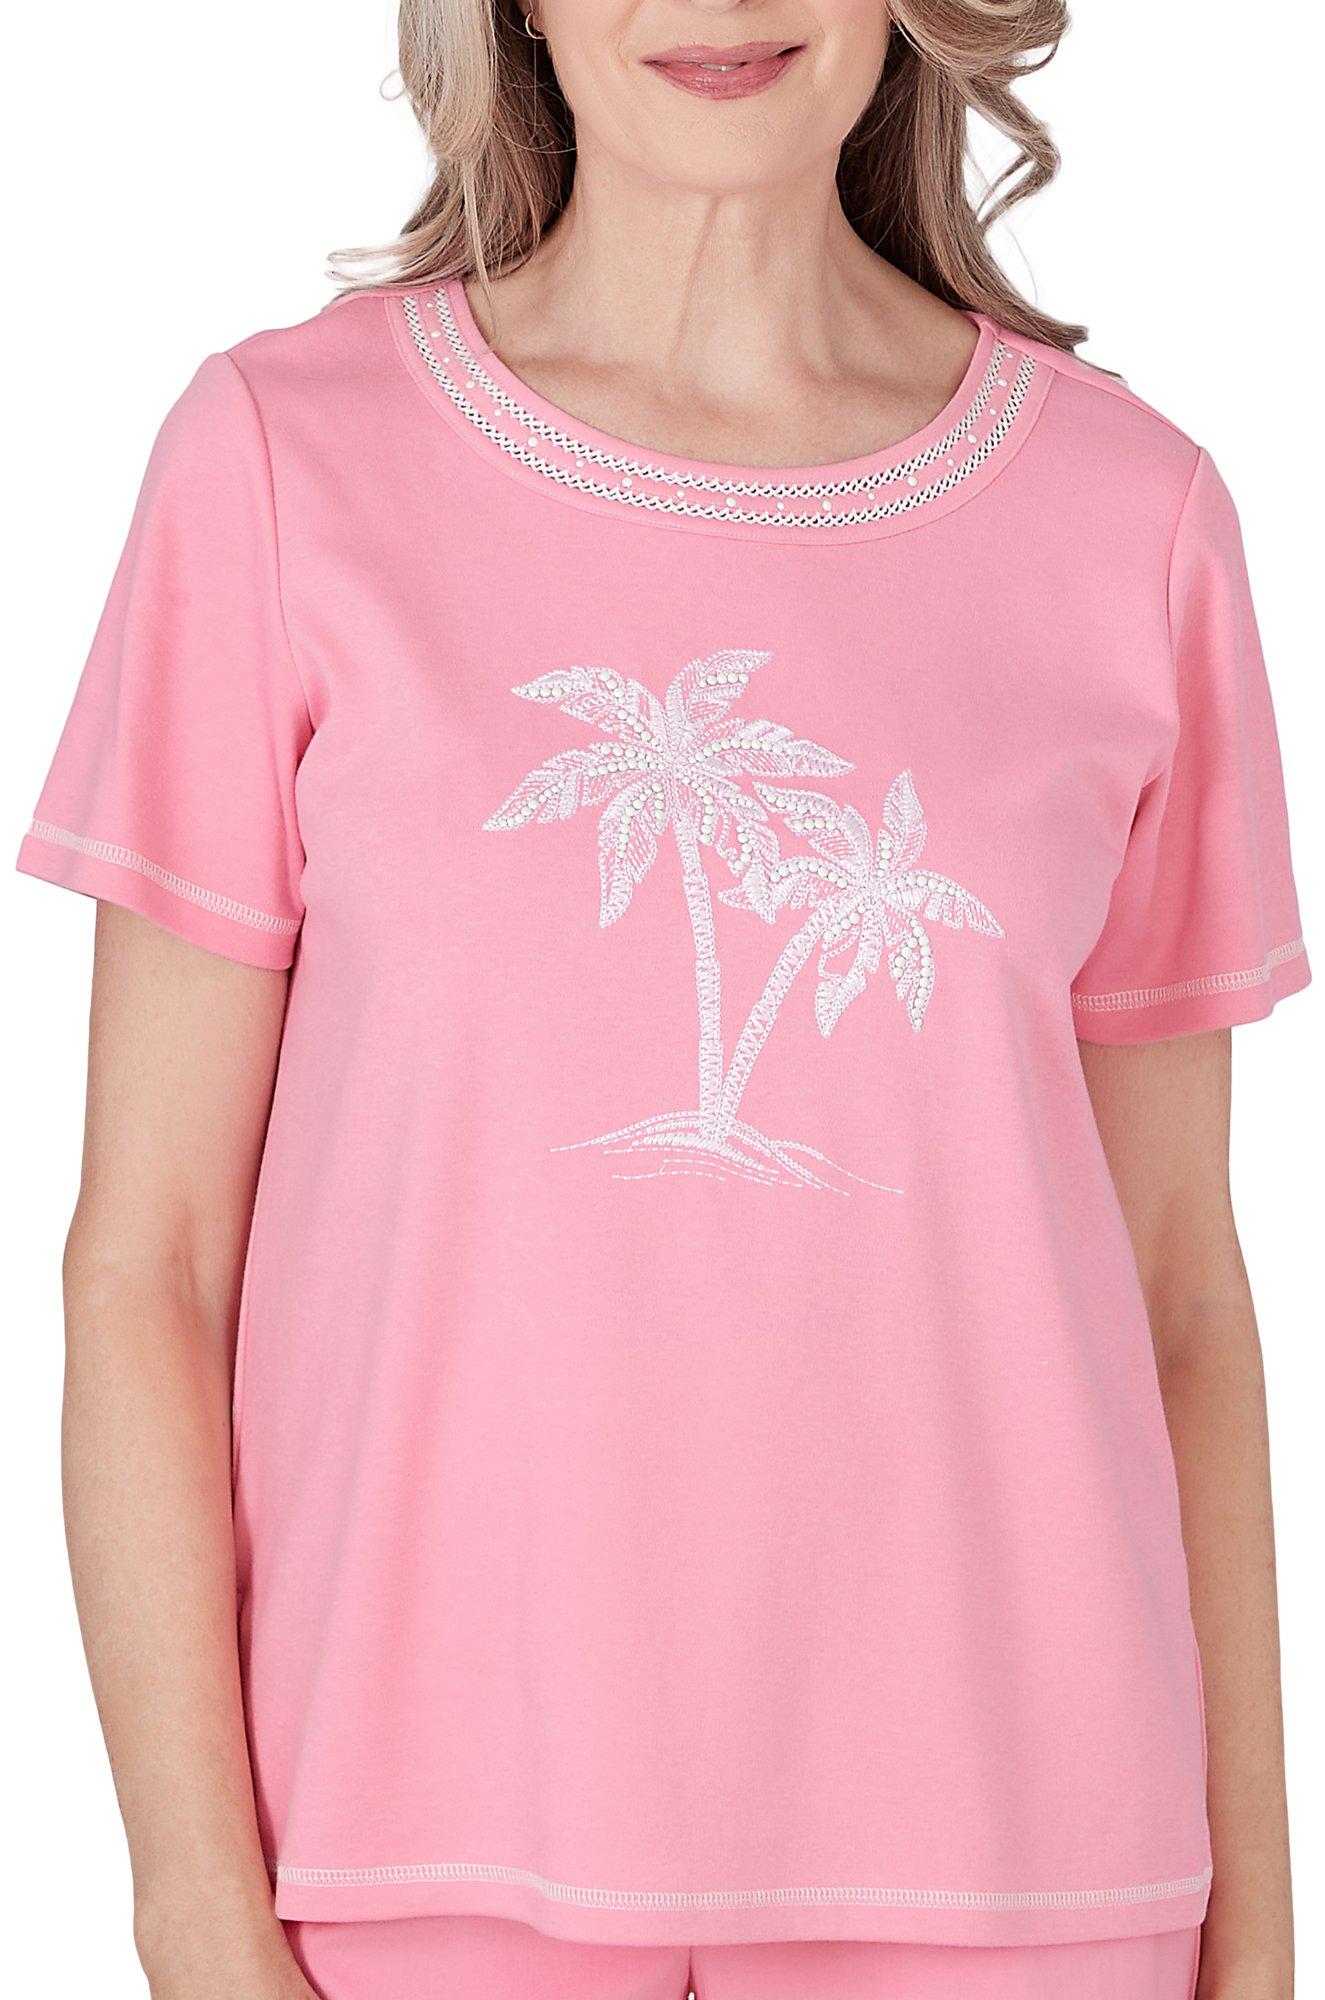 Womens Embroidered Palm Tree Short Sleeve Top